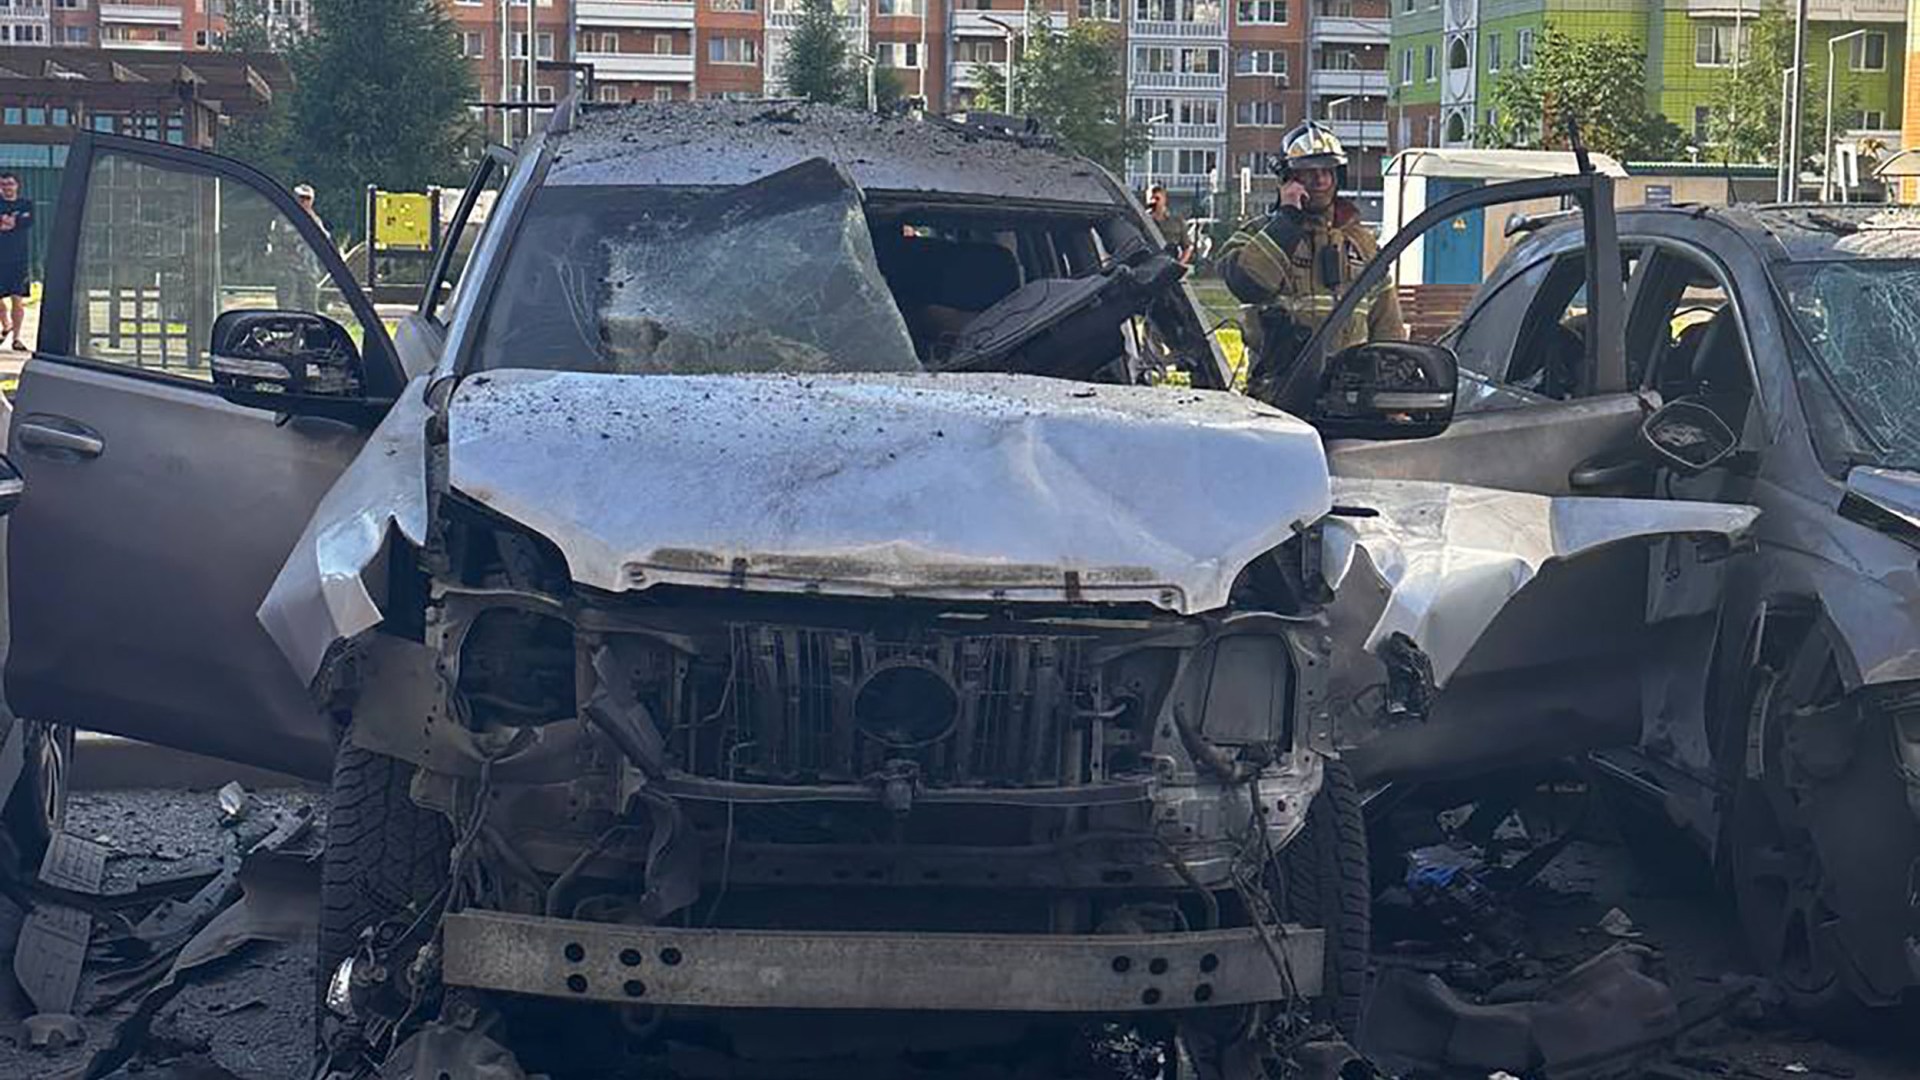 Dramatic moment car bomb ‘blows up Putin commander’ in Moscow in suspected Ukrainian attack behind enemy lines [Video]